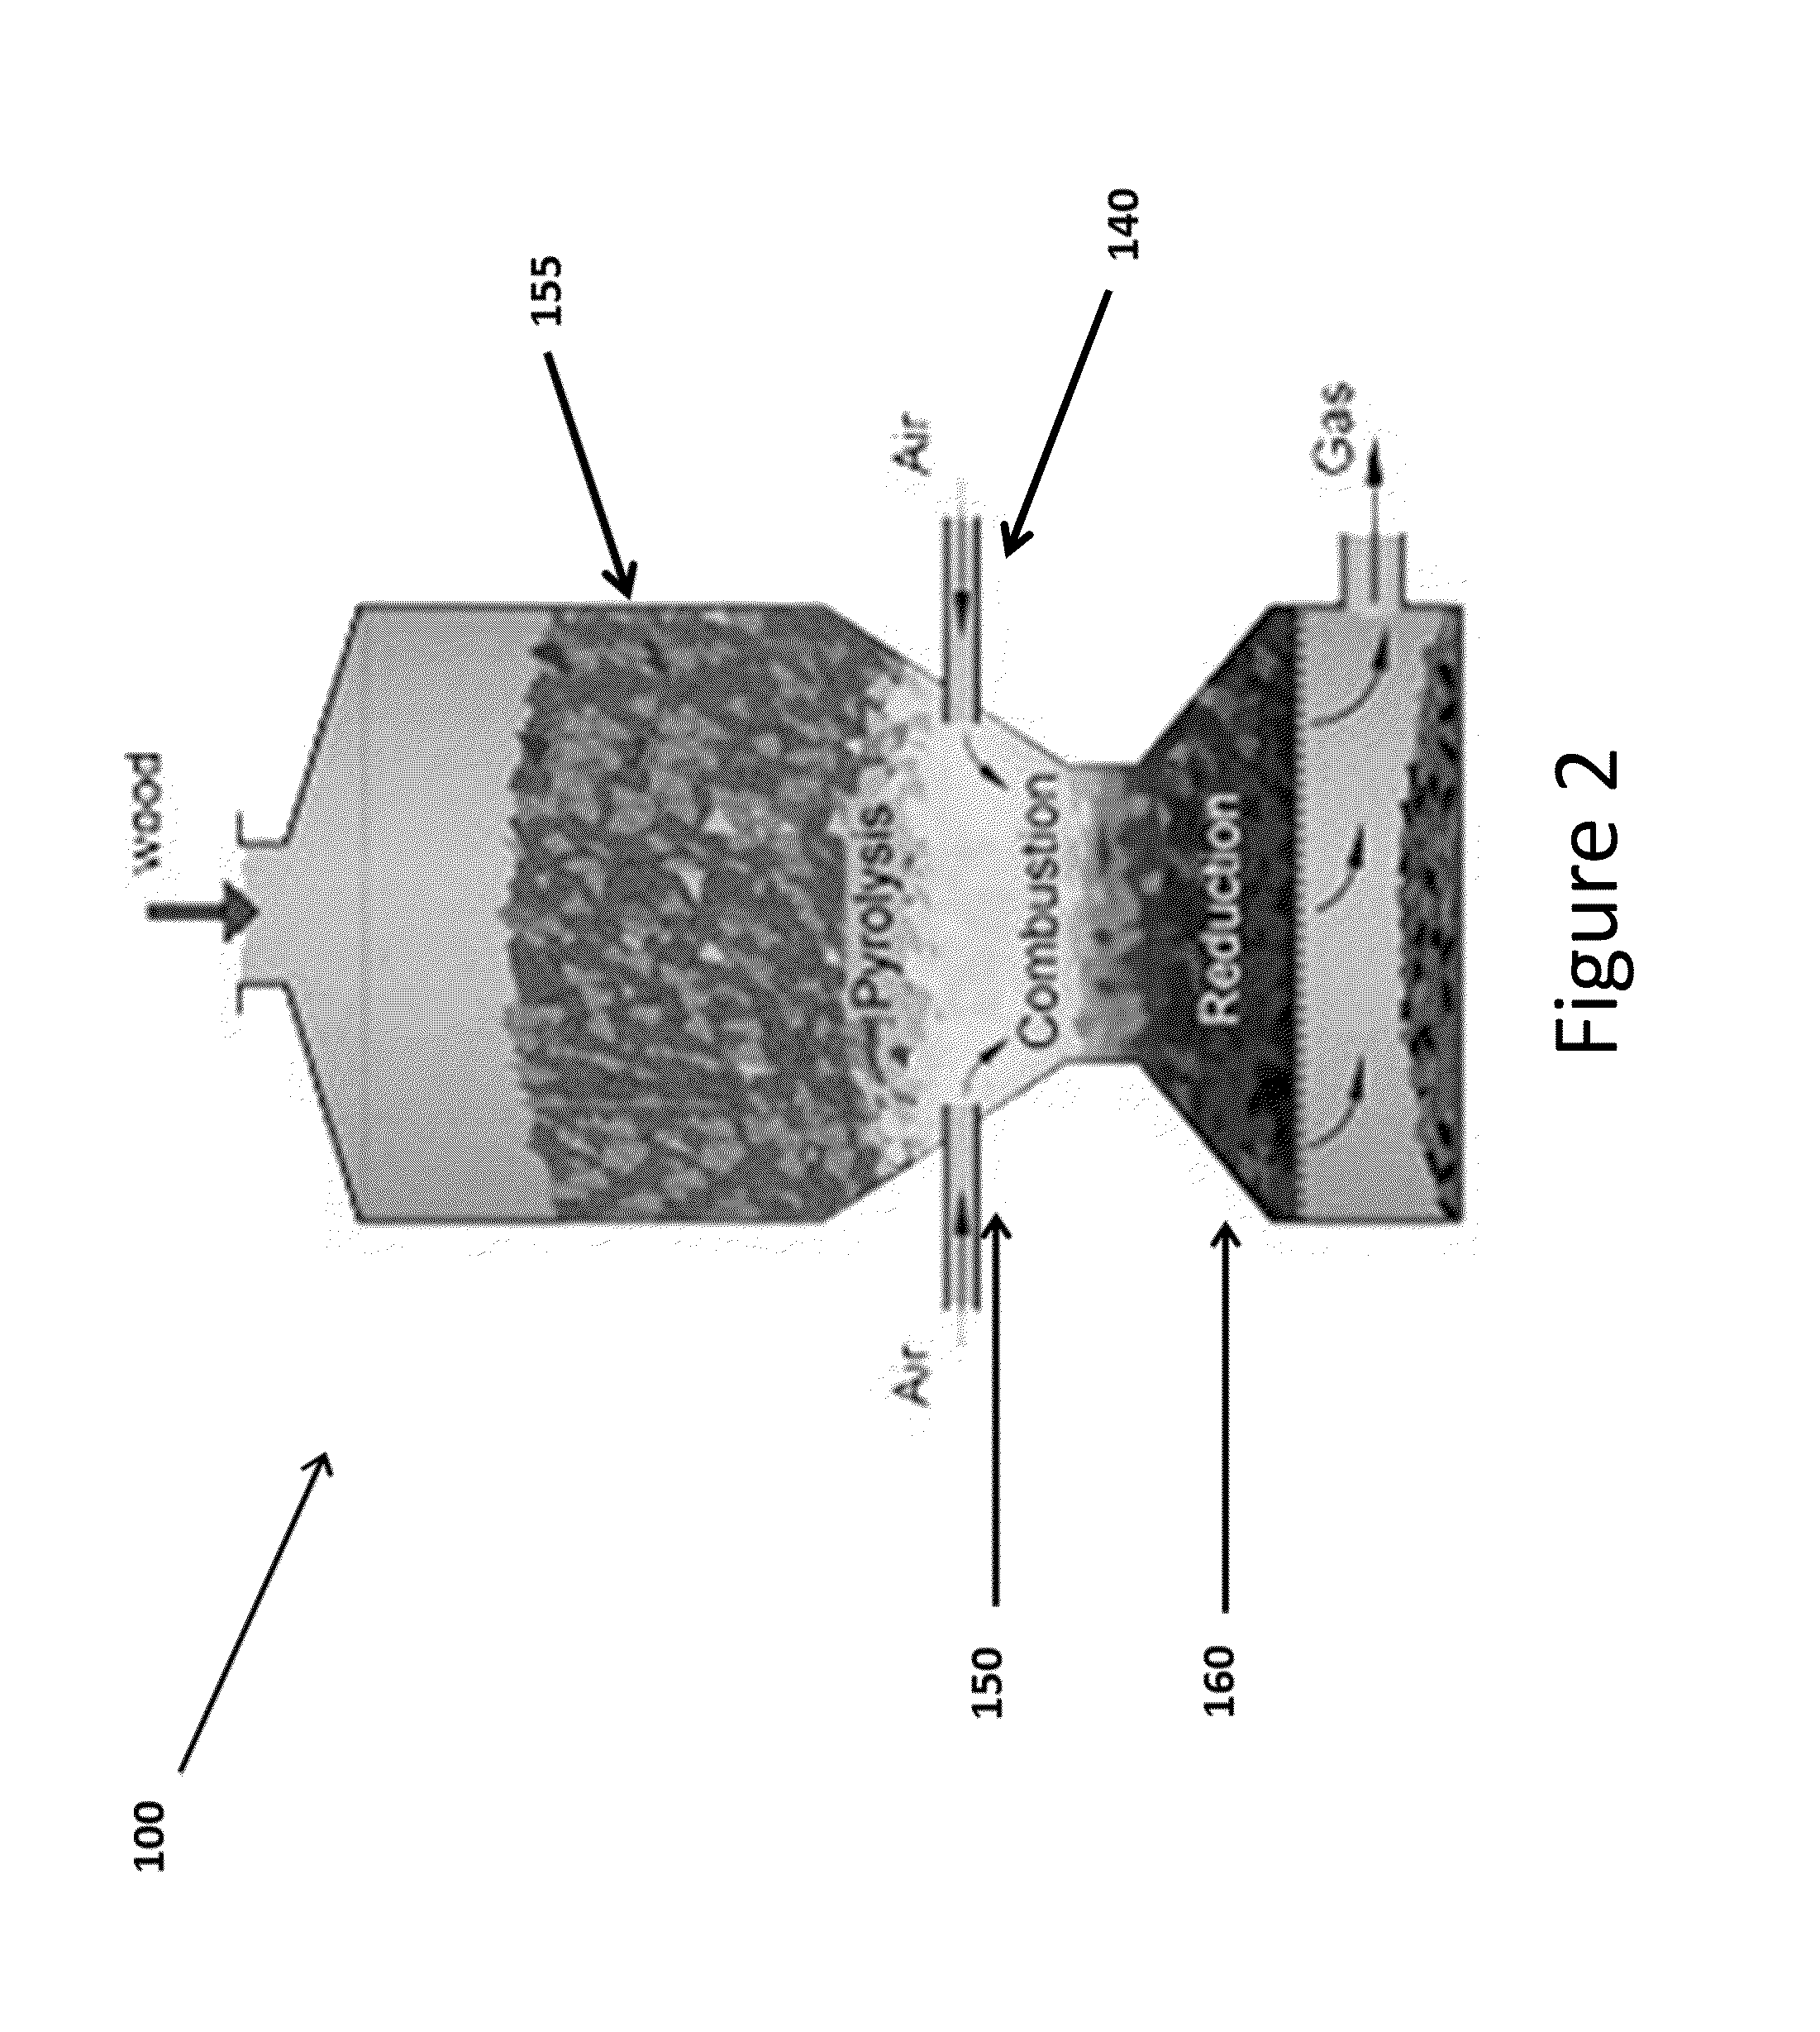 Coaxial gasifier for enhanced hydrogen production